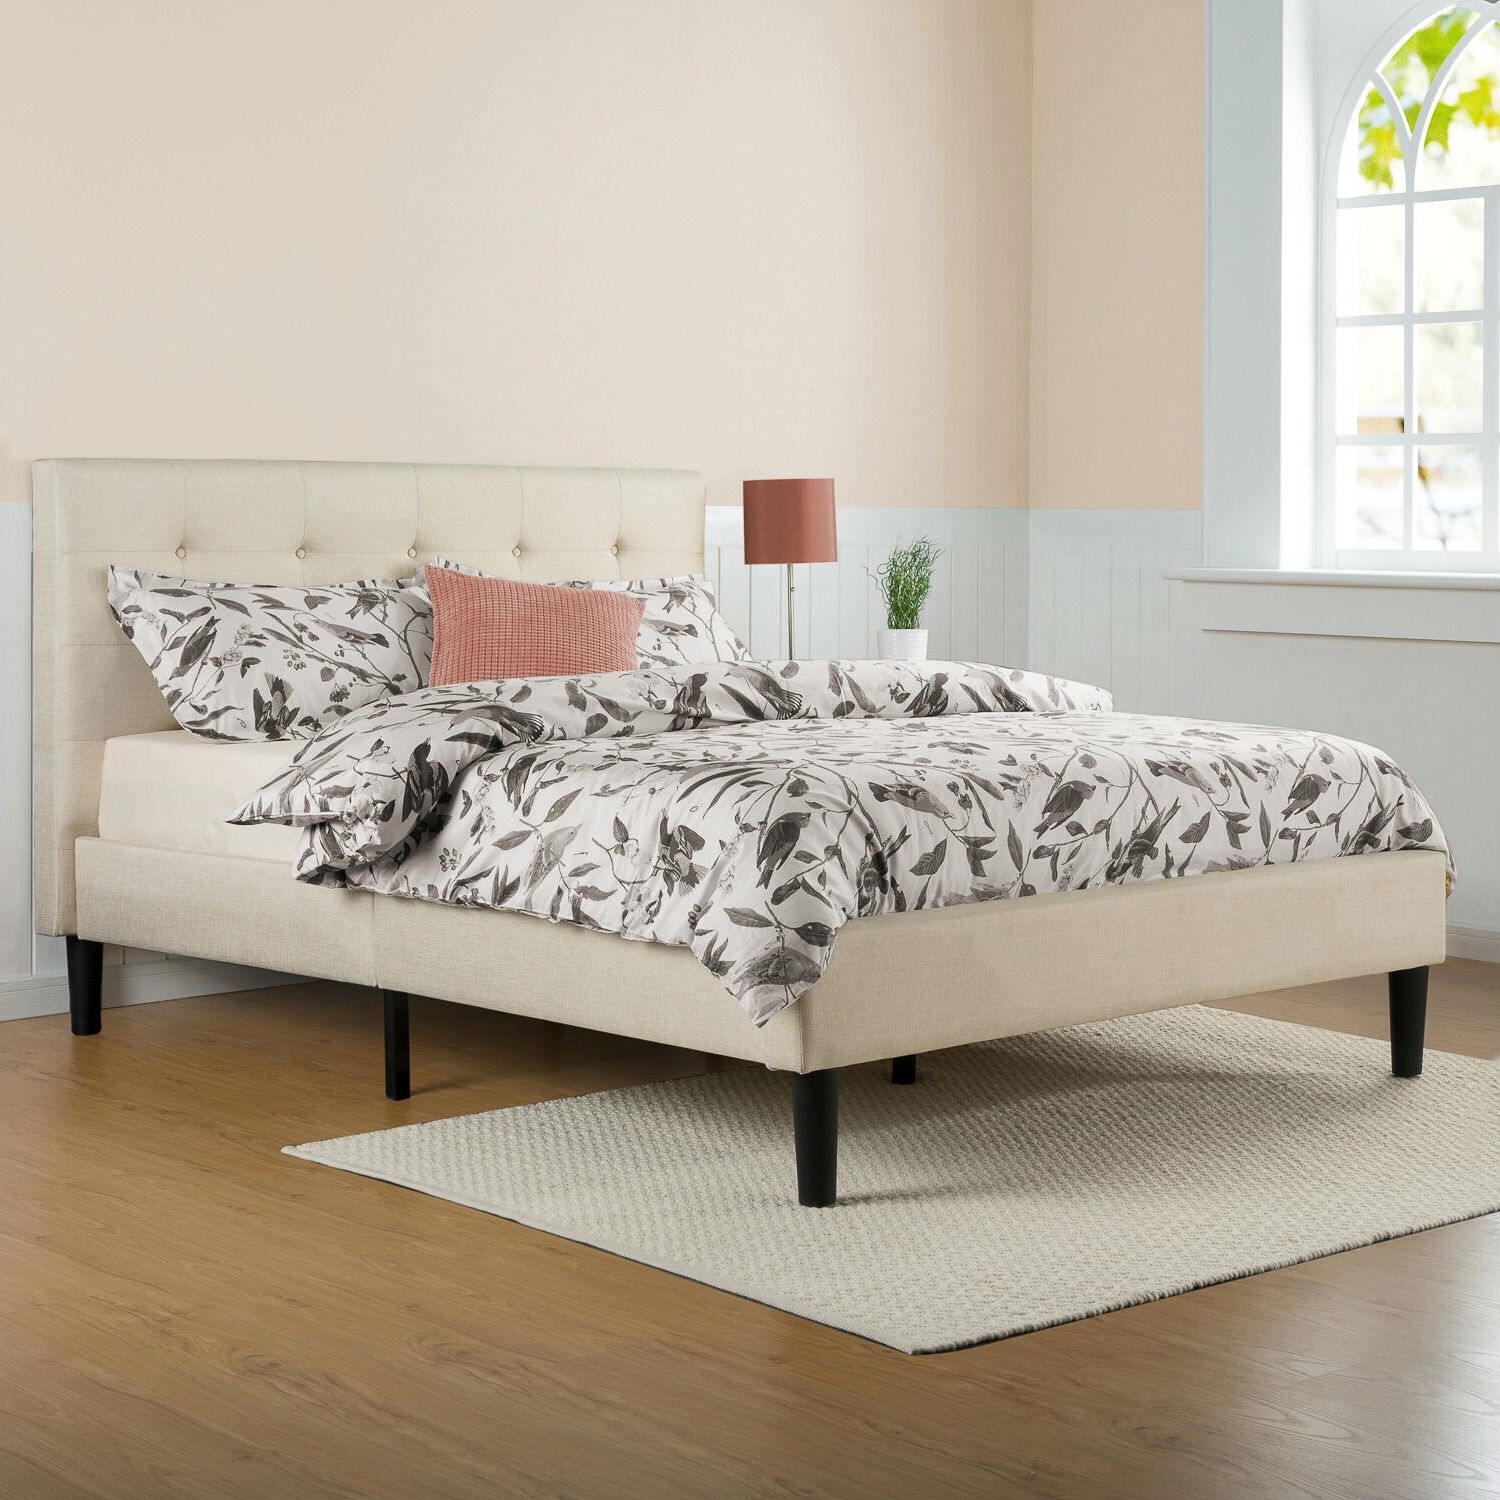 Queen Size Bed Frame With Headboard Upholstered Frame Furniture Wood Slats 